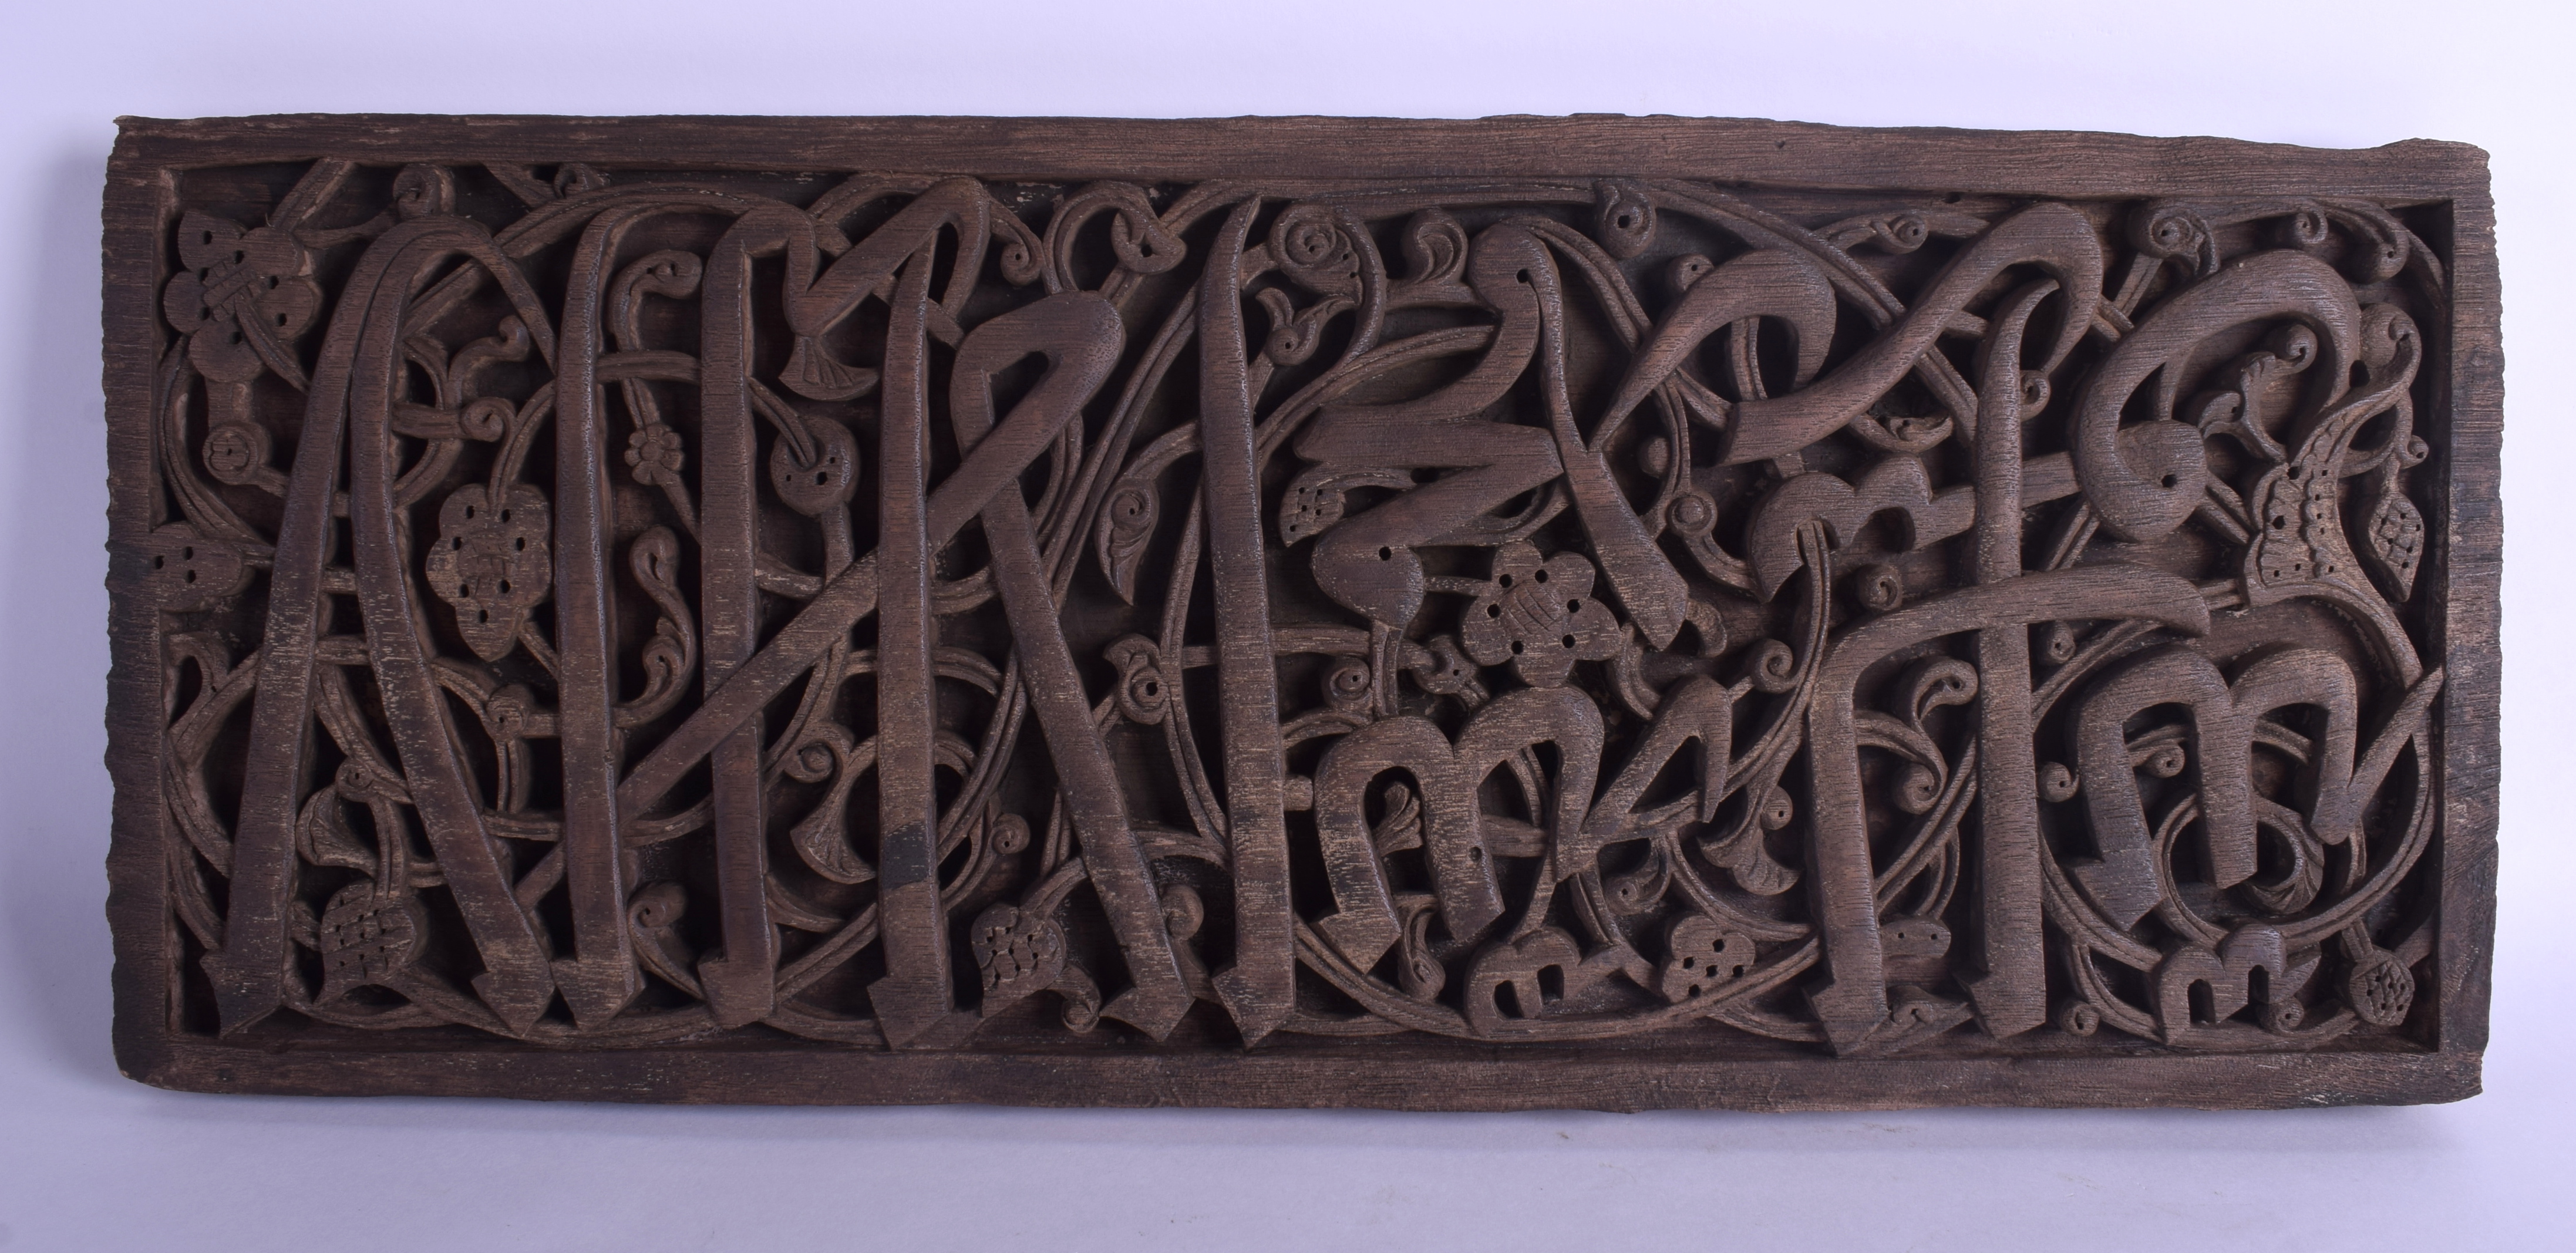 AN UNUSUAL TURKISH MIDDLE EASTERN CARVED WOOD CALLIGRAPHY PANEL formed with swirling motifs. 50 cm